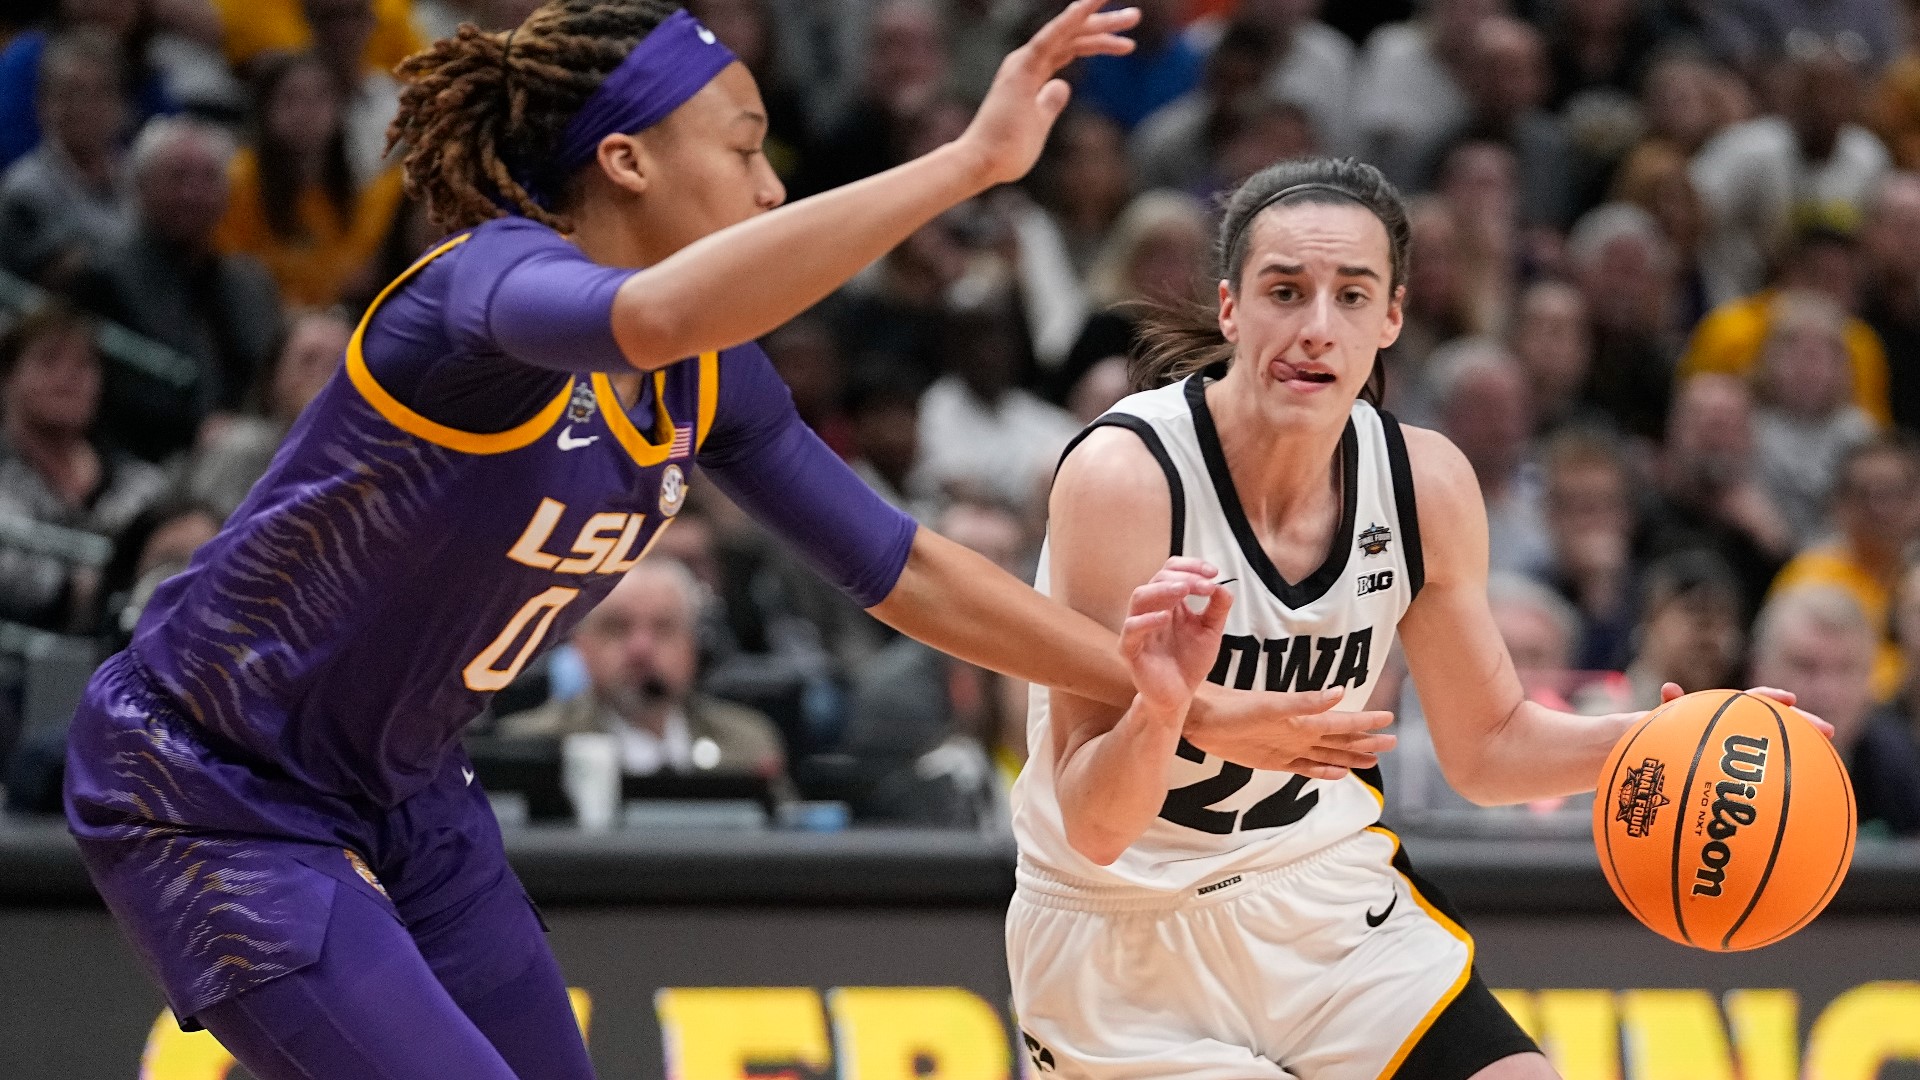 LSU won a national championship in front of millions of viewers. Caitlin Clark, Jasmine Carson, Angel Reese and Kim Mulkey took center stage.